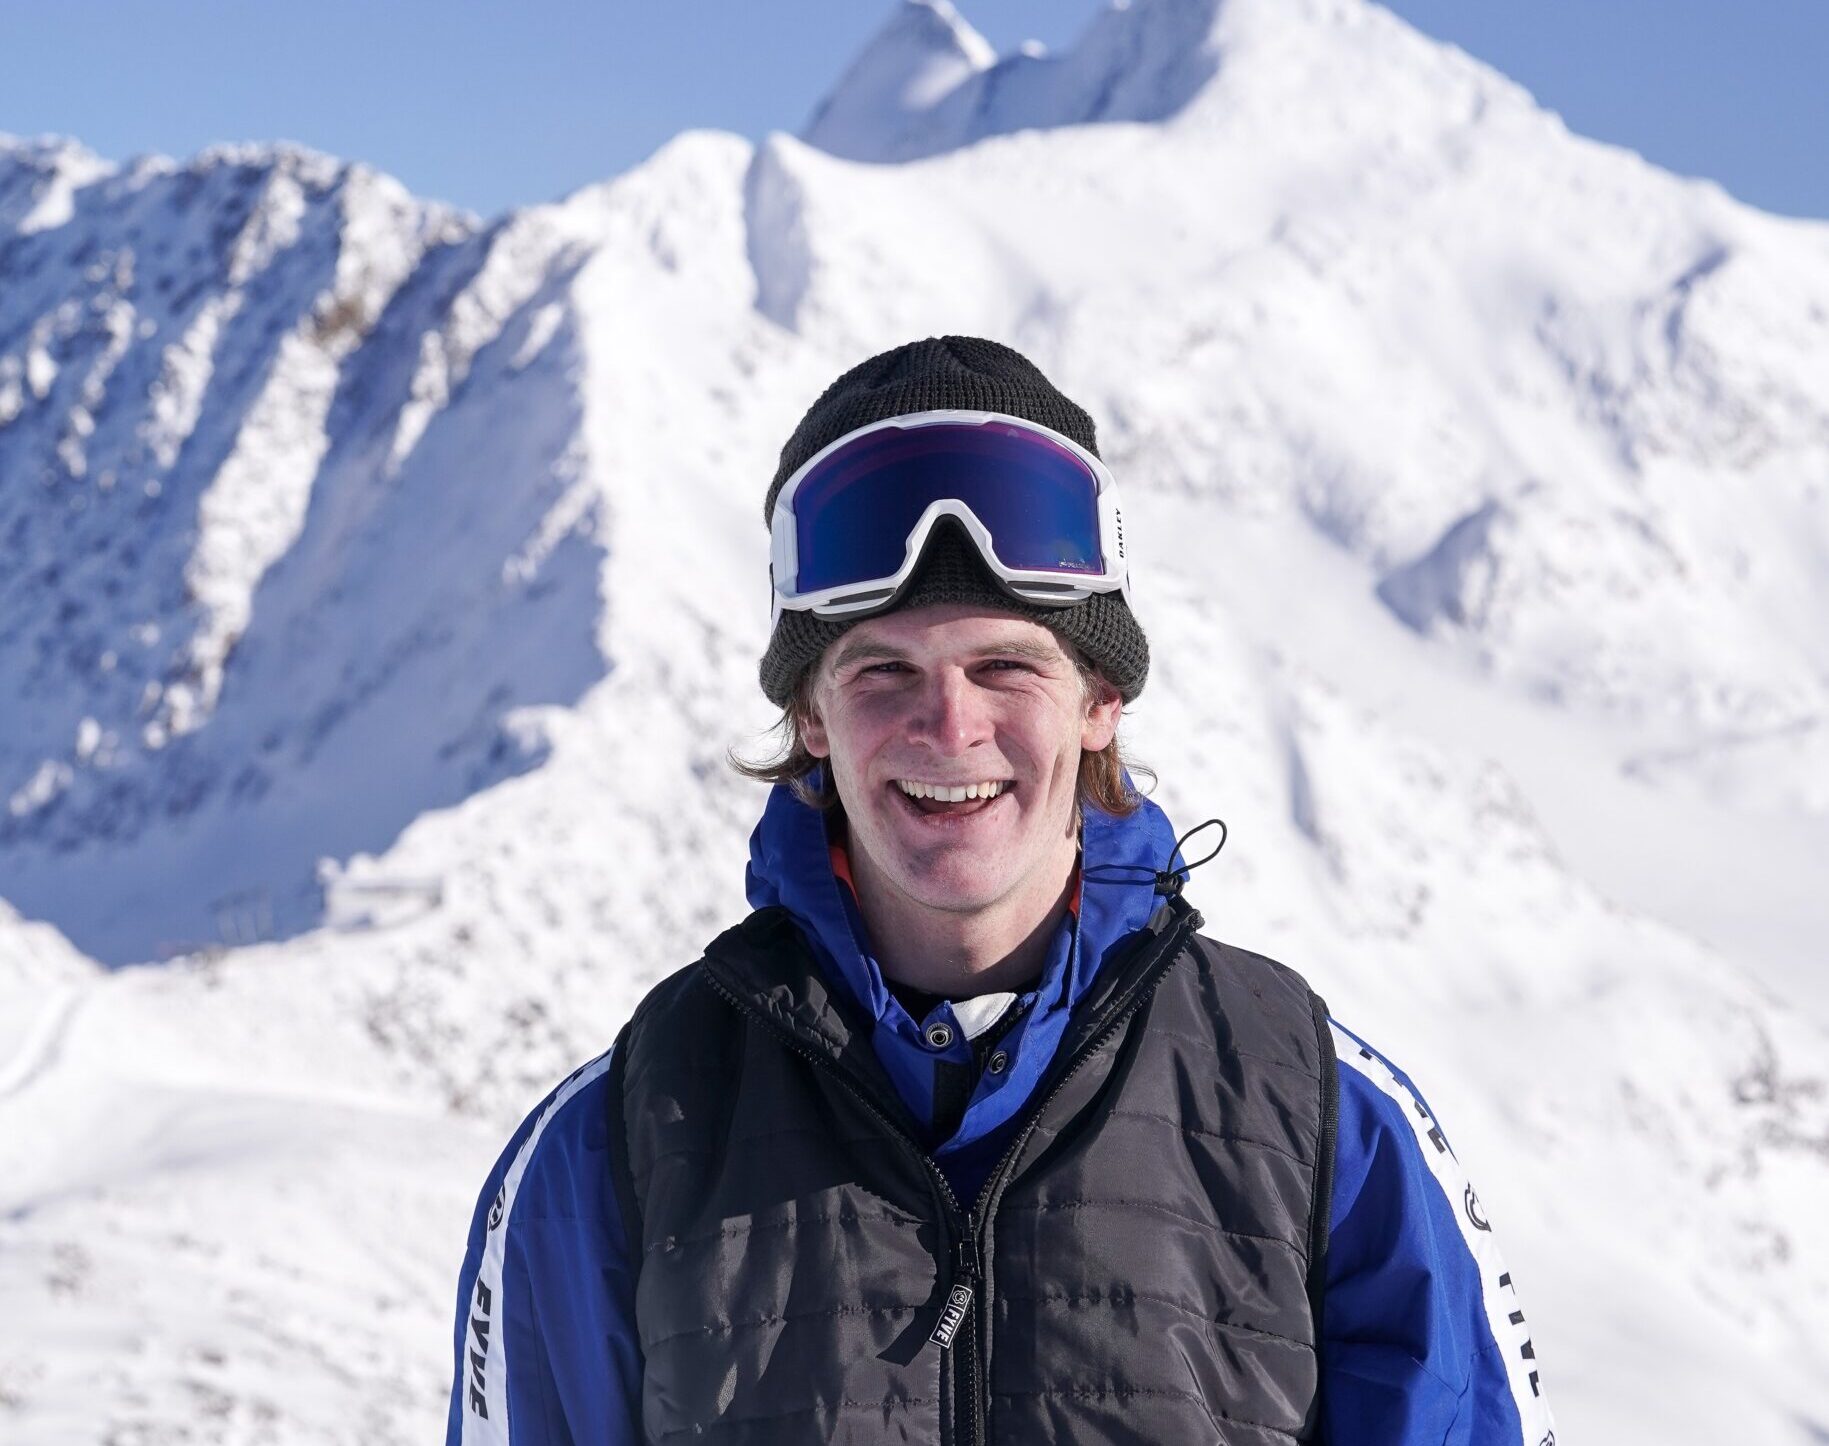 Big Air and Slopestyle Snowboarder Matty Cox to compete for Britain